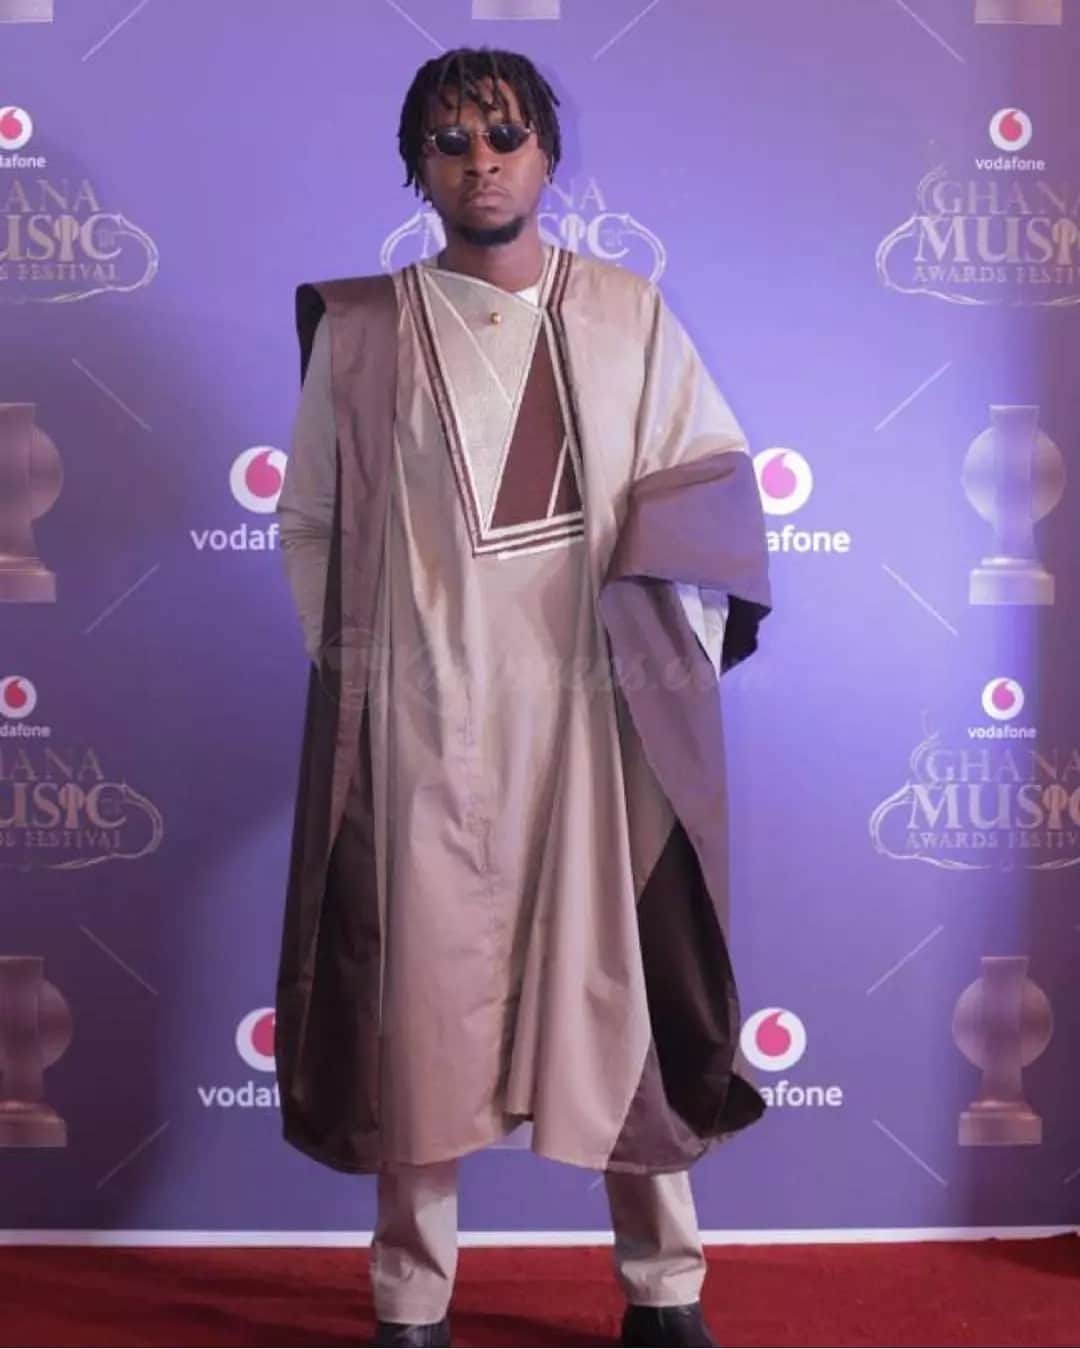 All the photos of Ghanaian celebrities at VGMA 2018